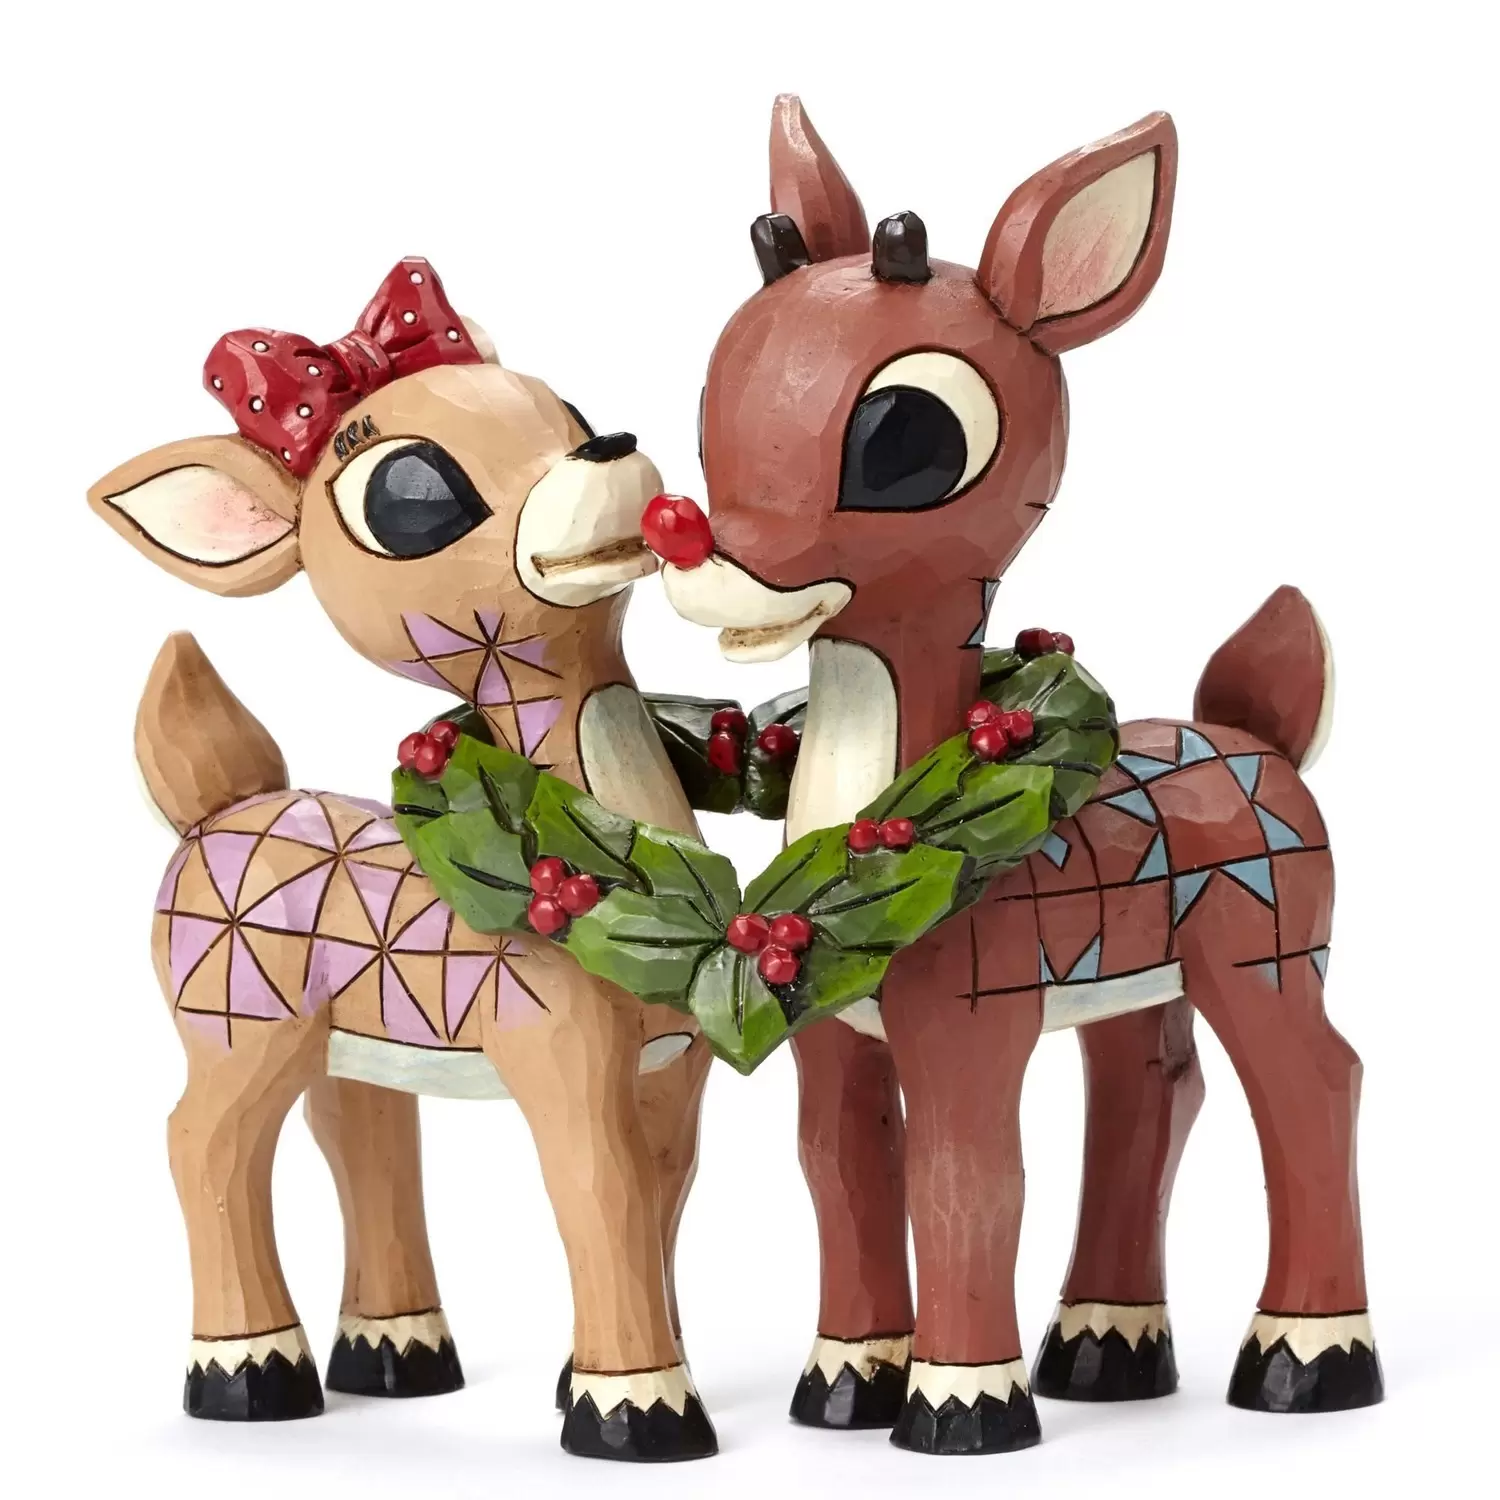 Cartoons Characters by Jim Shore - Rudolph and Clarice with Wreath